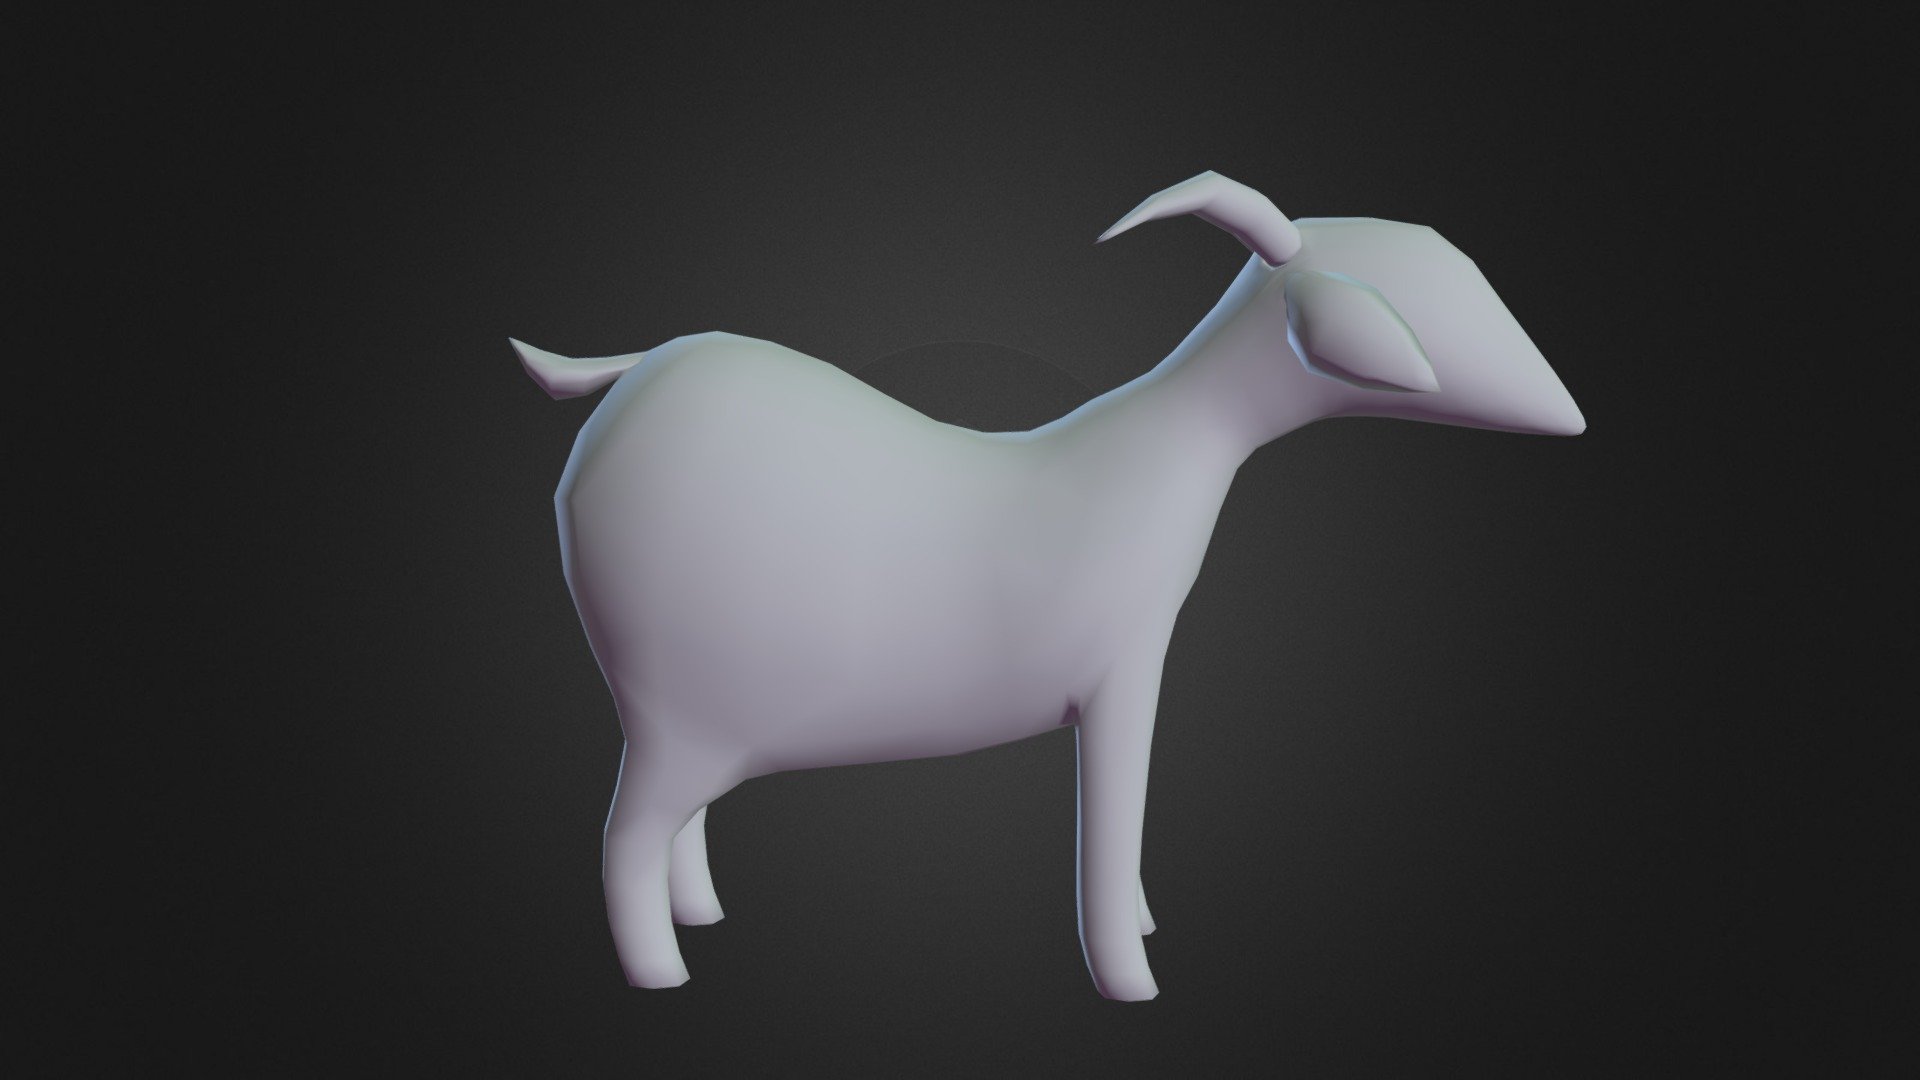 Goat redone to be more expressive and stylistic